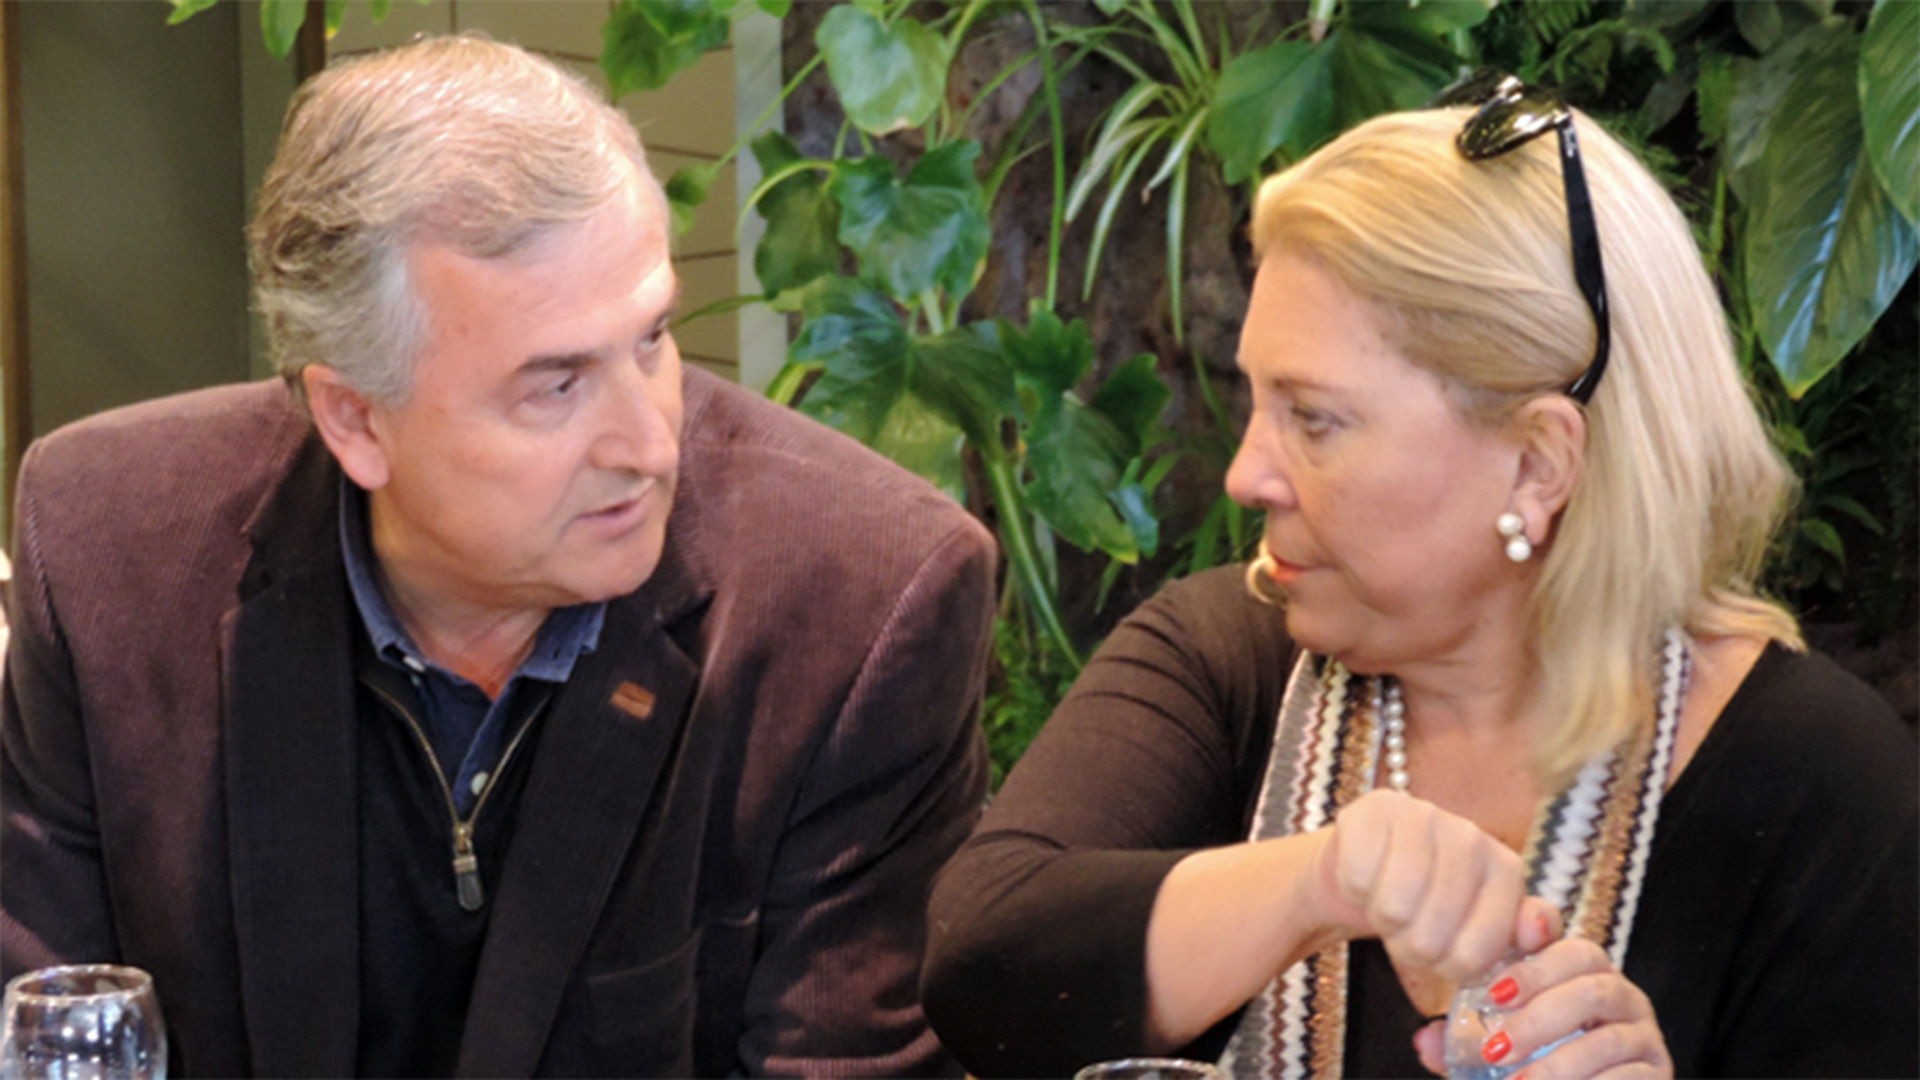 Morales and Carrió considered the crossing they had due to the governor's relationship with Massa to be over